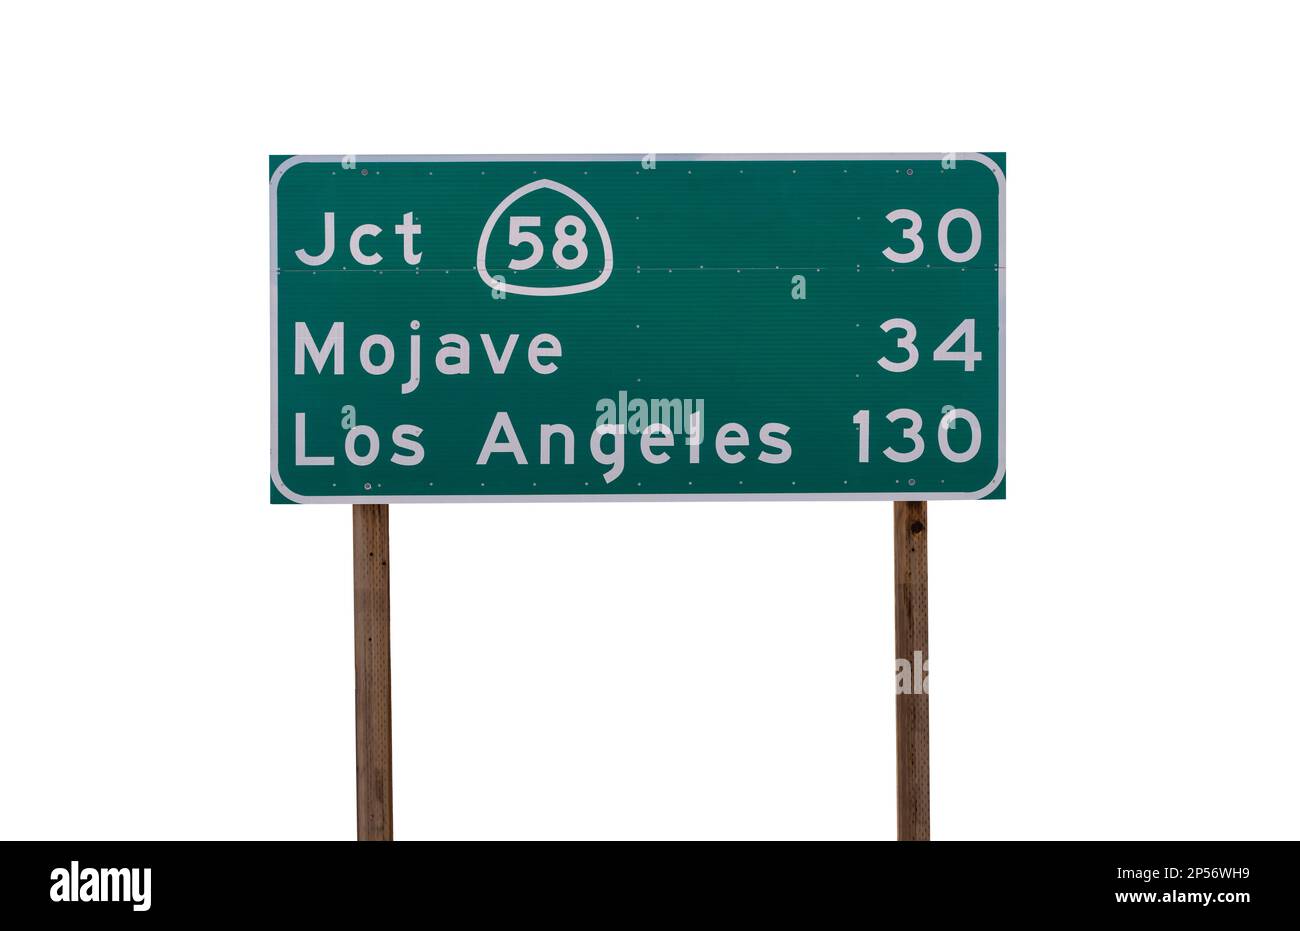 Mojave, Los Angeles and Route 58 junction highway sign with cut out background. Stock Photo